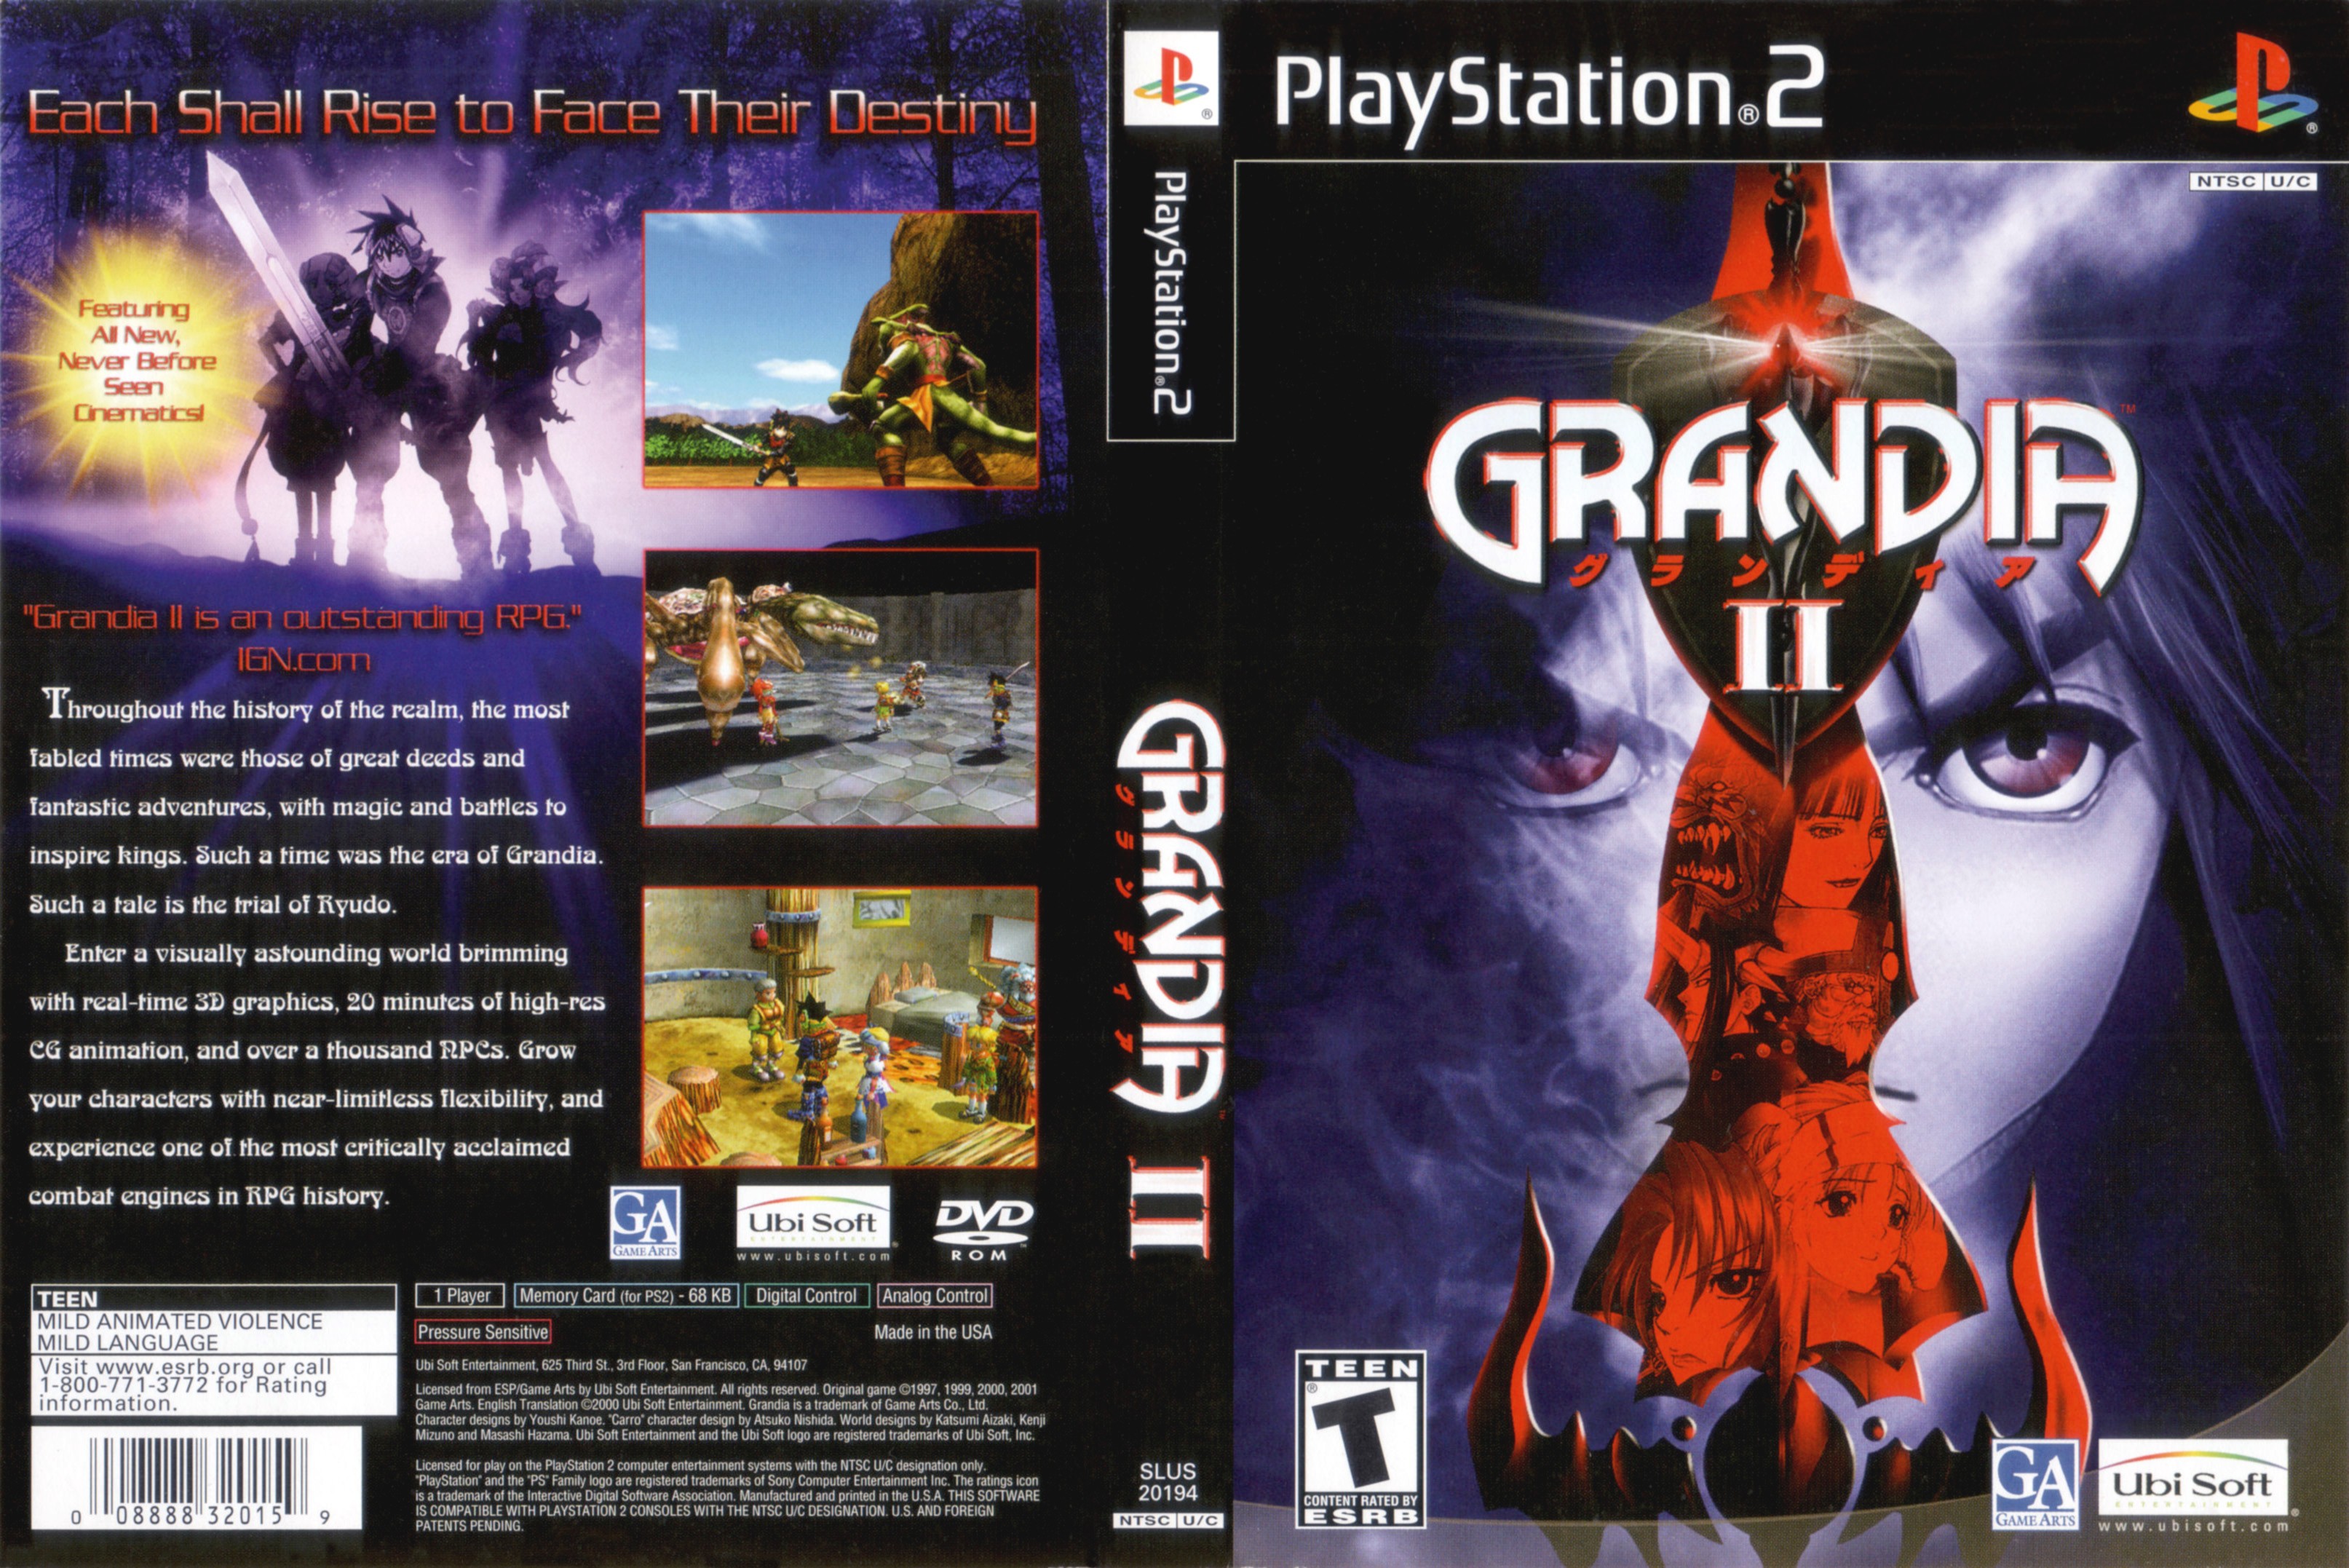 Replicate face to many ps2. Grandia 3 ps2 обложка. Grandia 2 ps2. Grandia 2 обложка. Sony PLAYSTATION 2 игры.